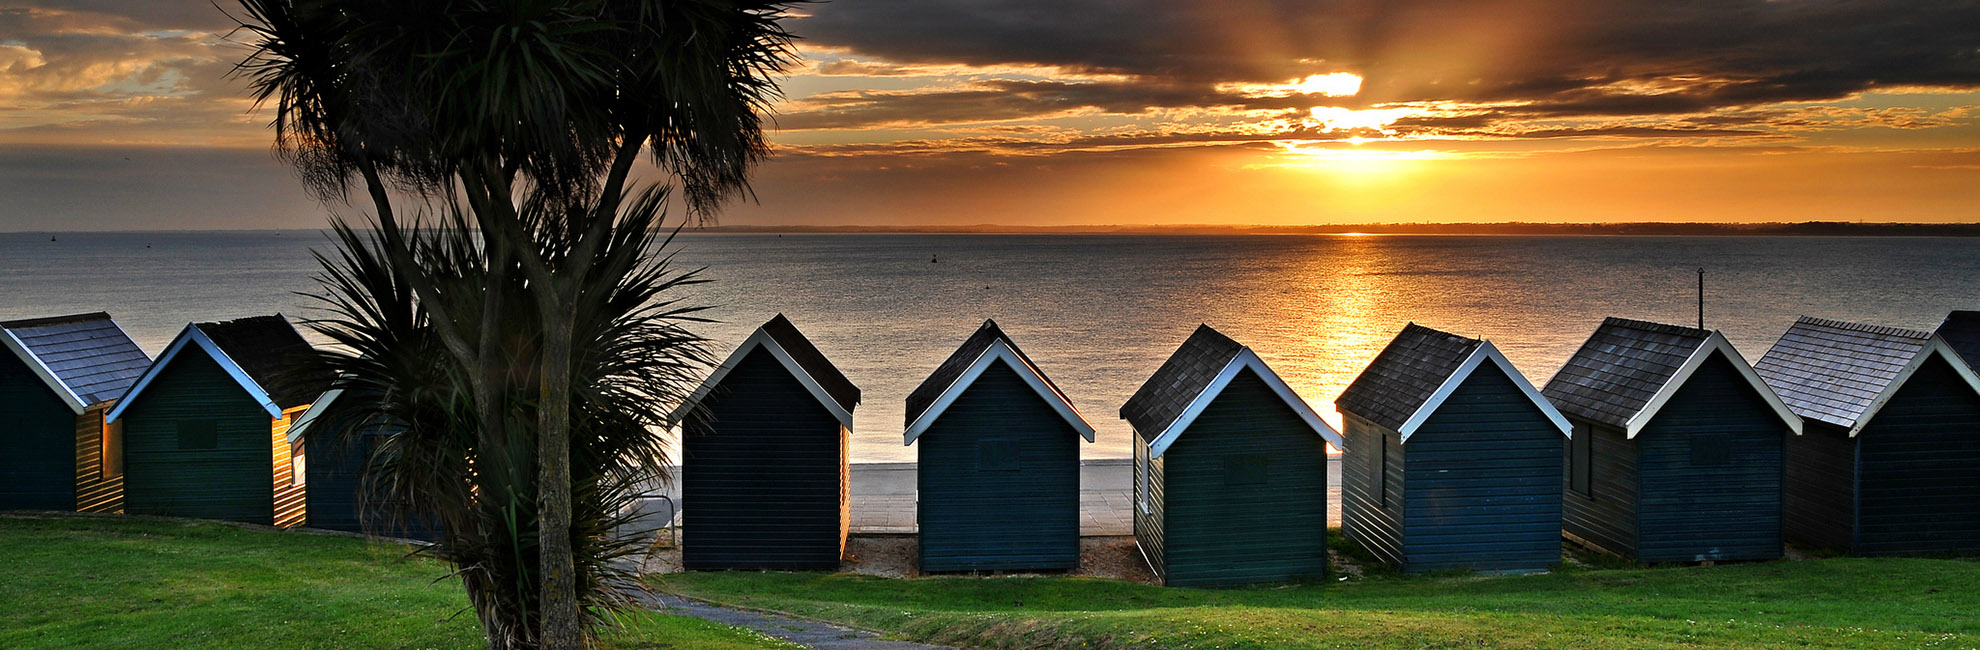 Beach huts overlooking a sunset over the sea